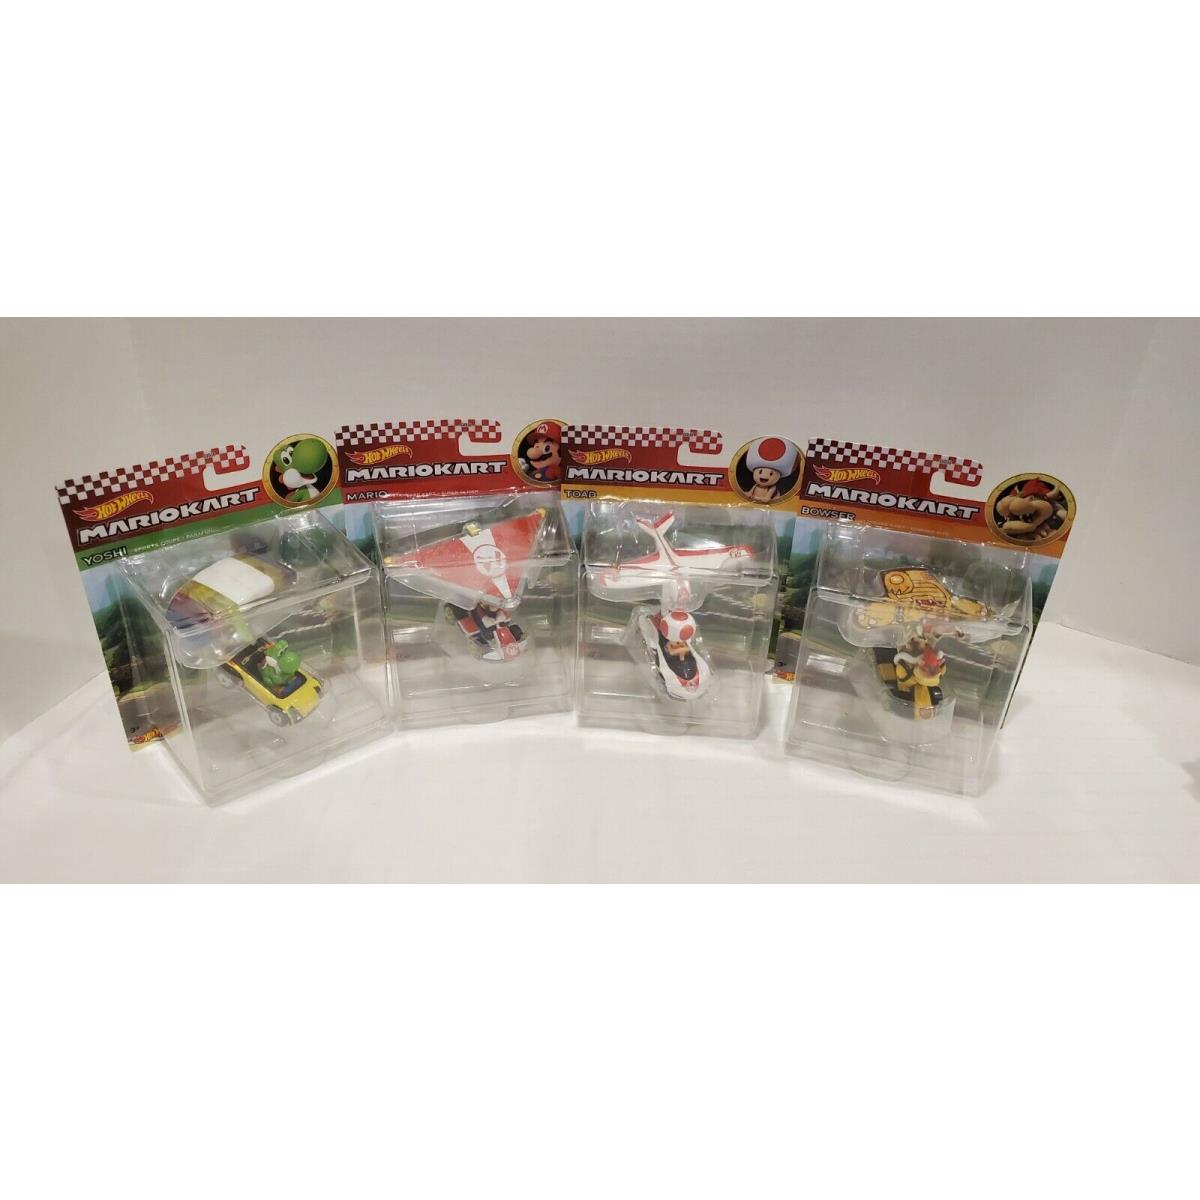 Mario Kart Hot Wheels Gliders Vehicle Complete Set of 4-Yoshi Mario Toad Bowser